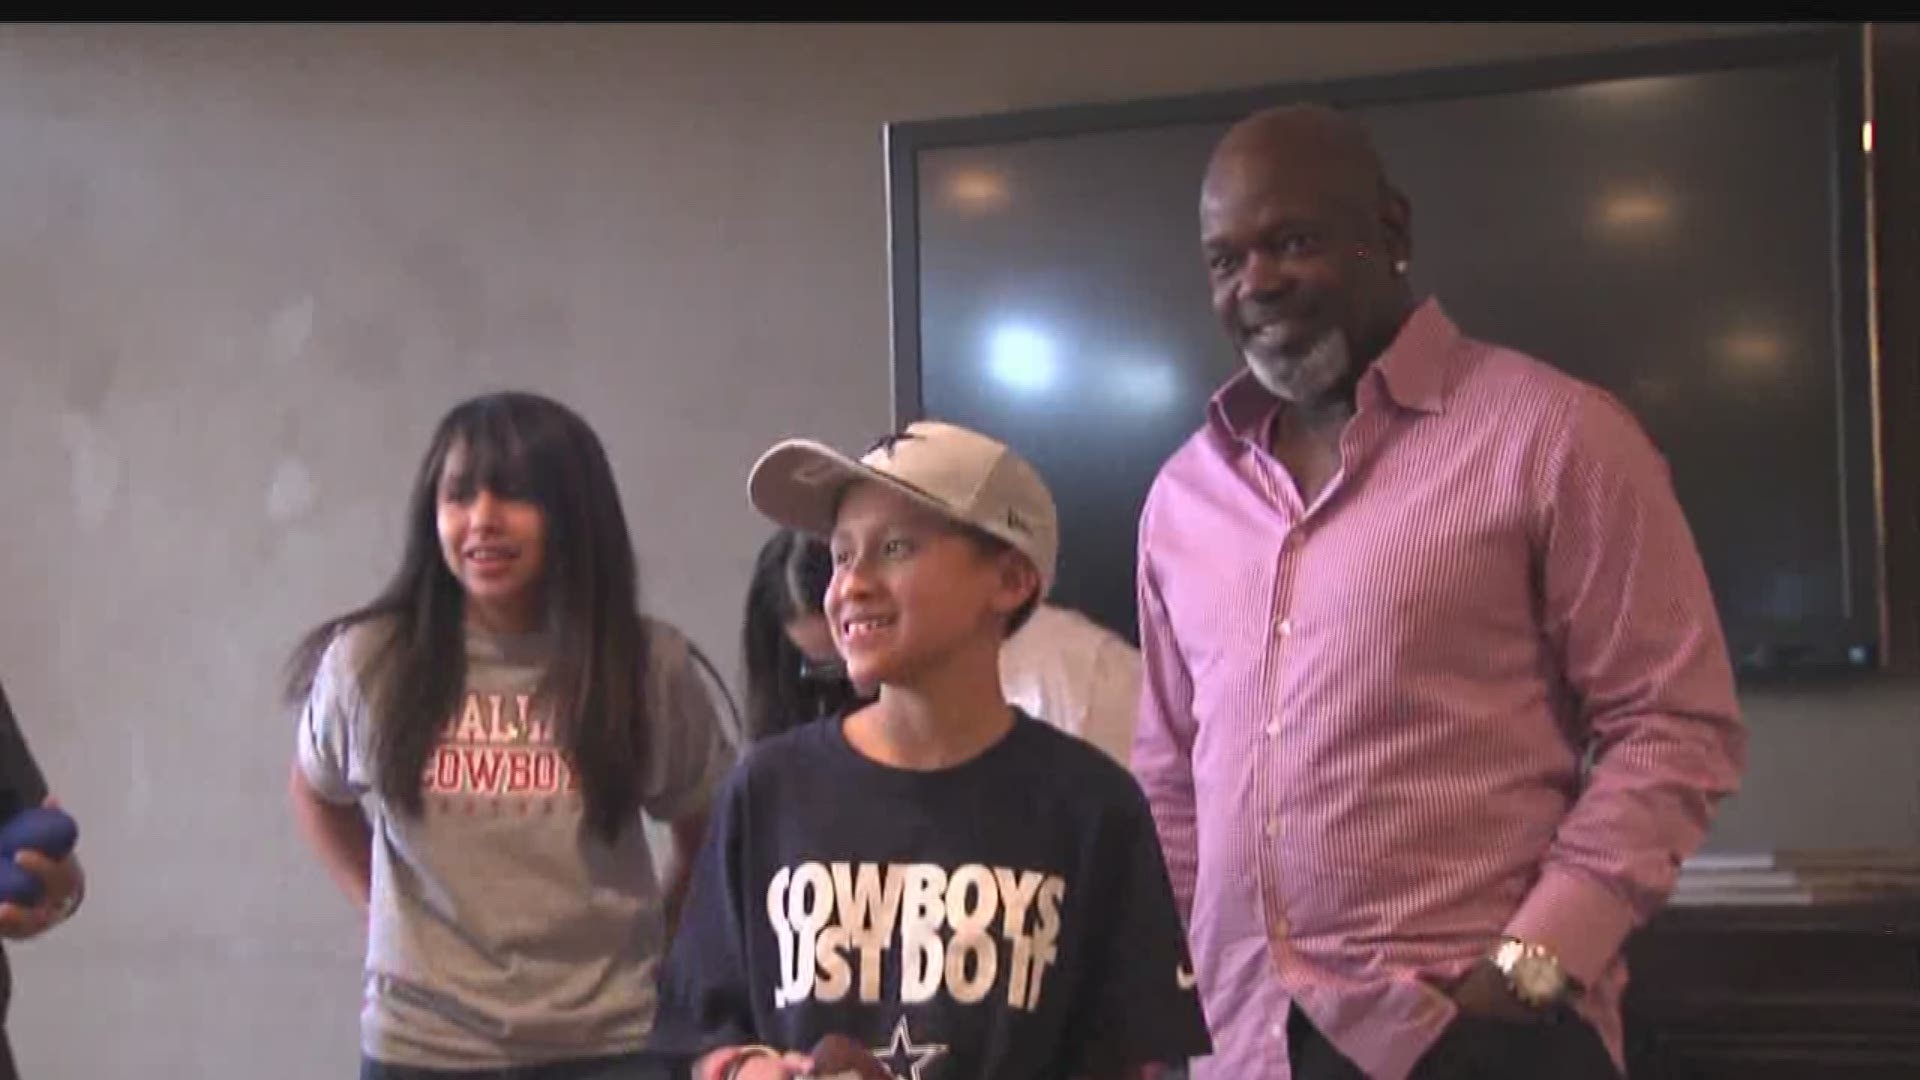 The Cowboys Hall of Famer visited the kids and their families before headlining the Casa de Amor event later that night.